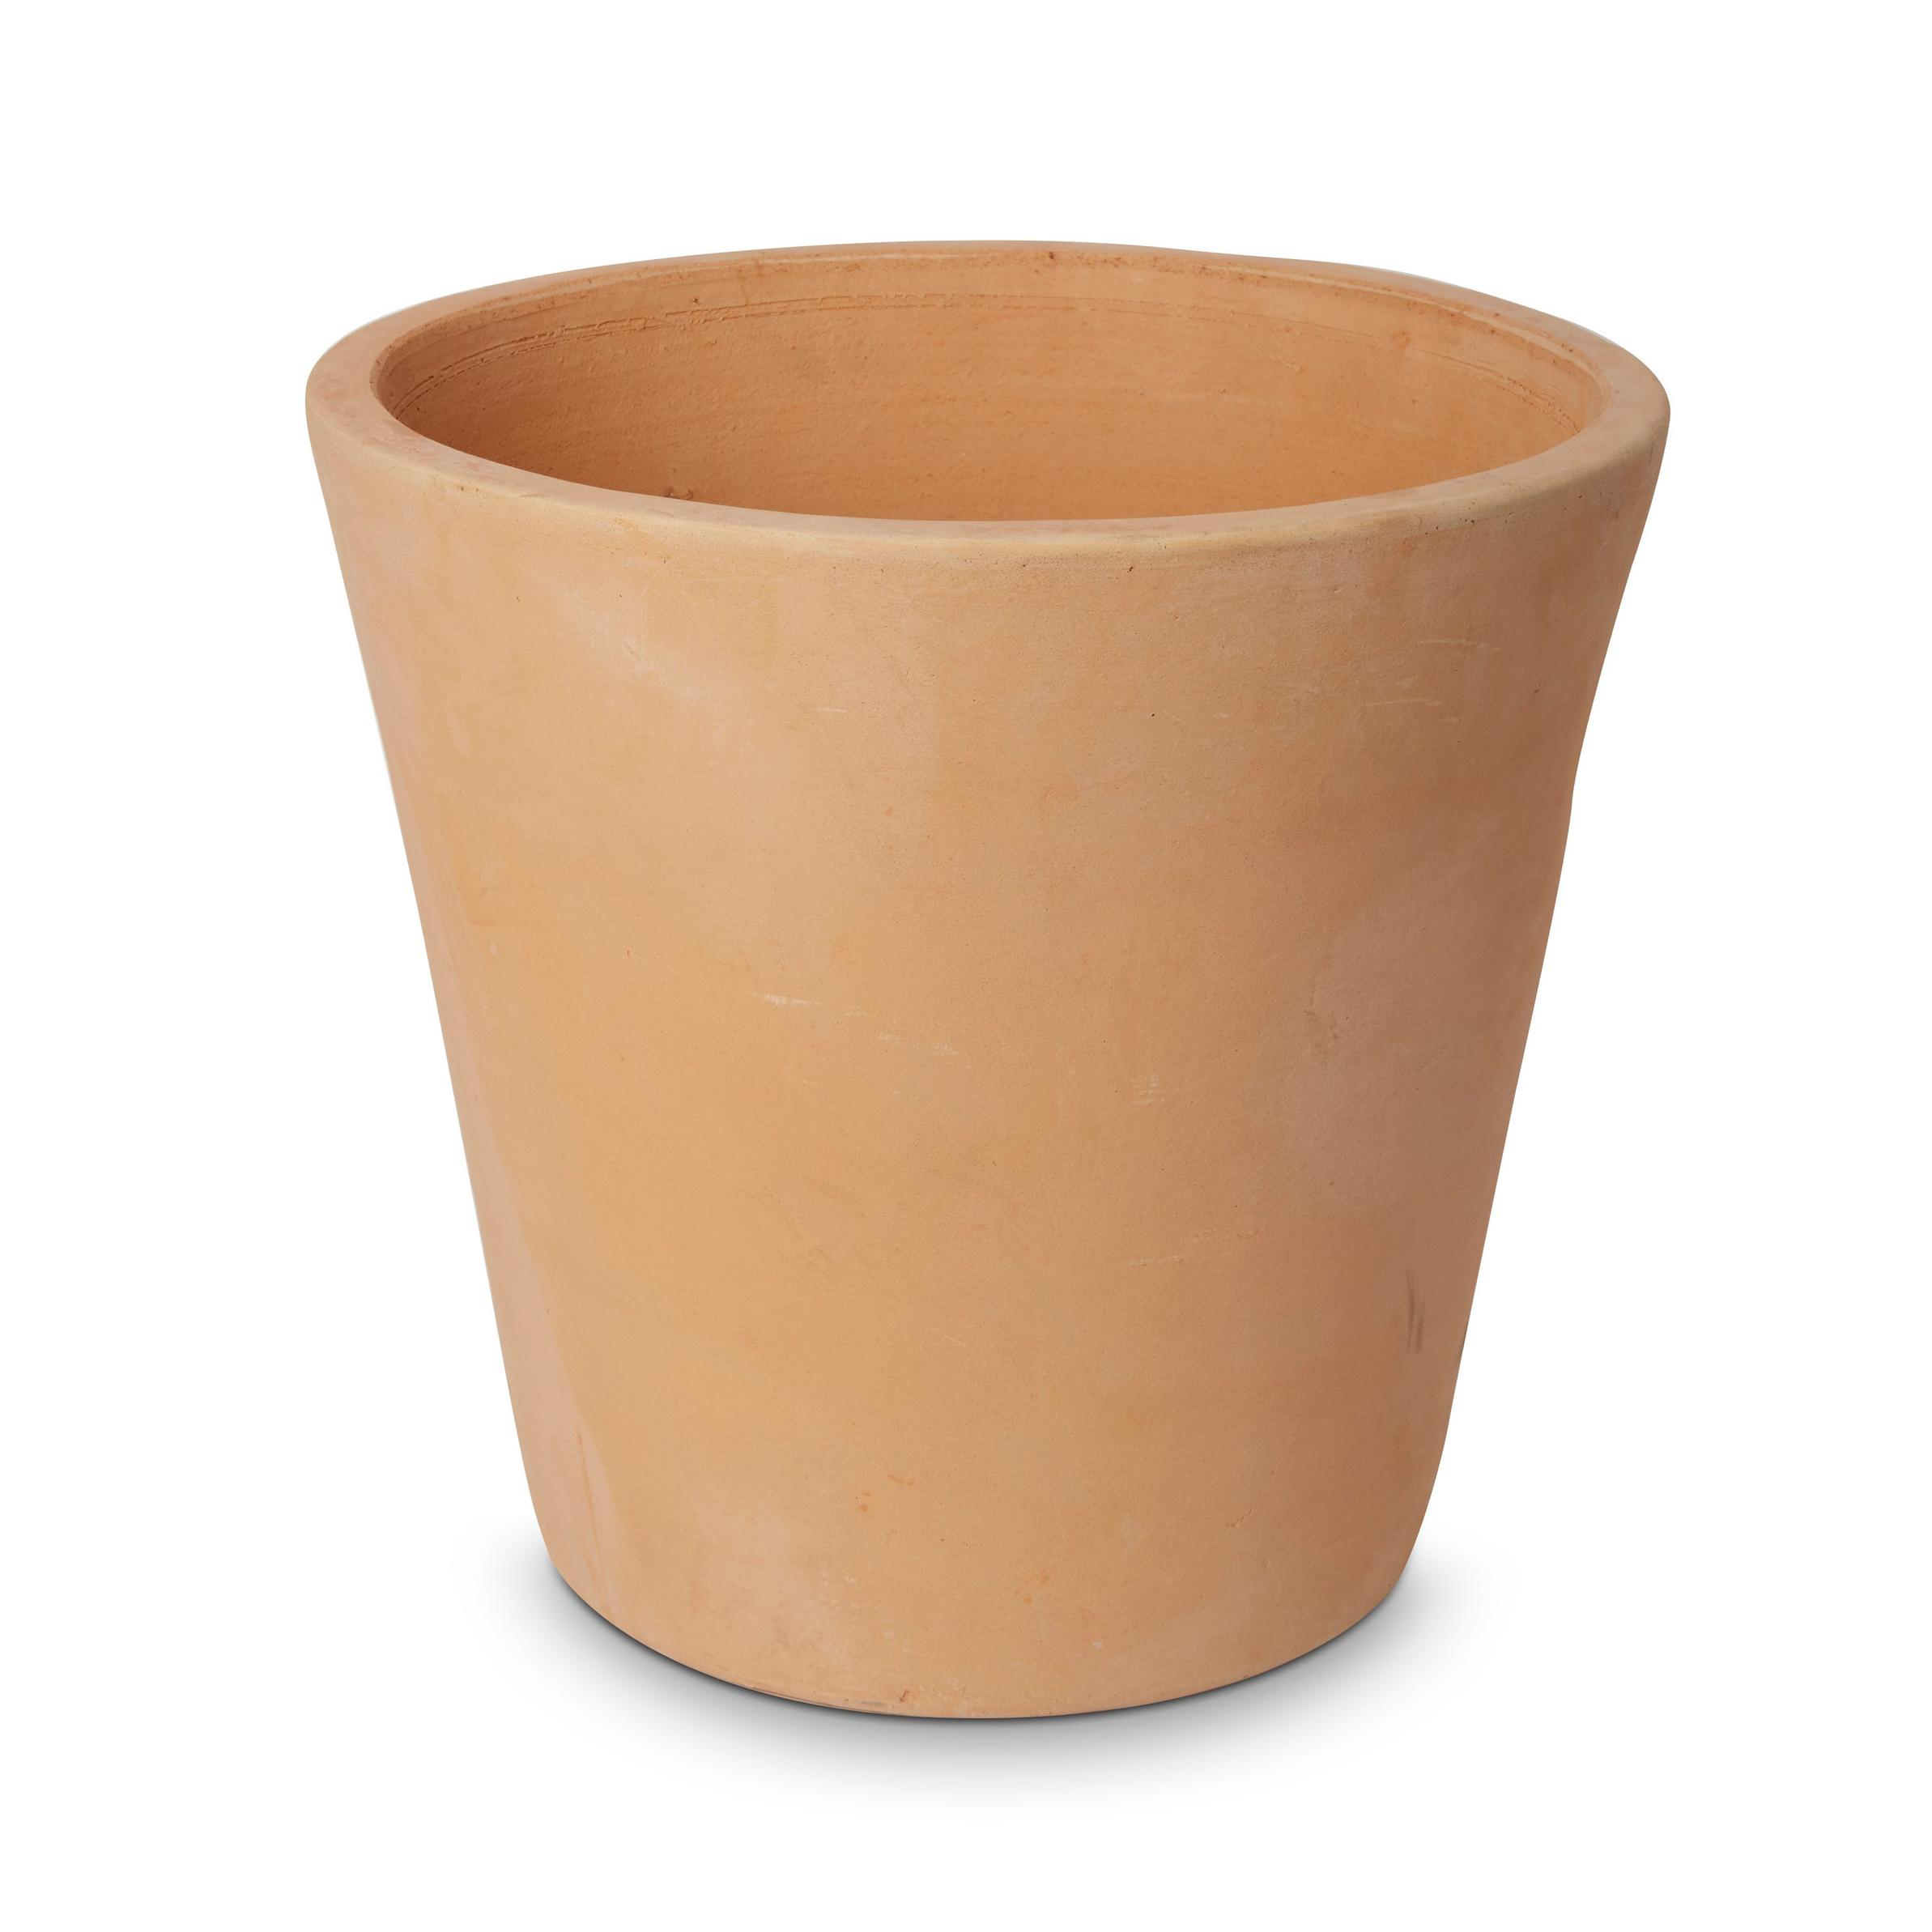 Verve Mali White washed Terracotta Circular Plant pot (Dia)40cm offers at £20 in B&Q